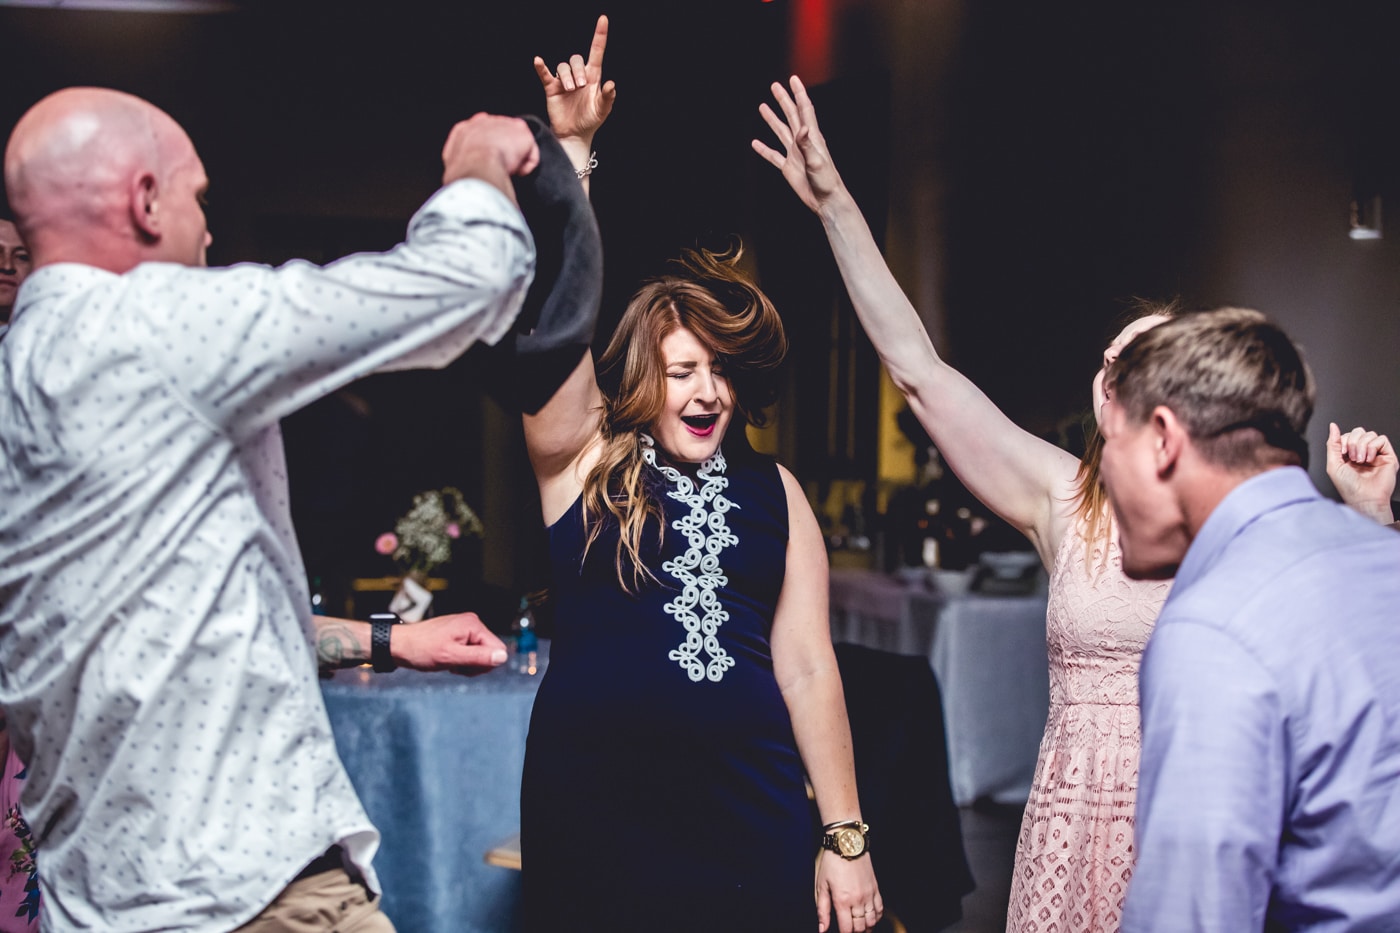 Wedding guests dancing with arms up at reception